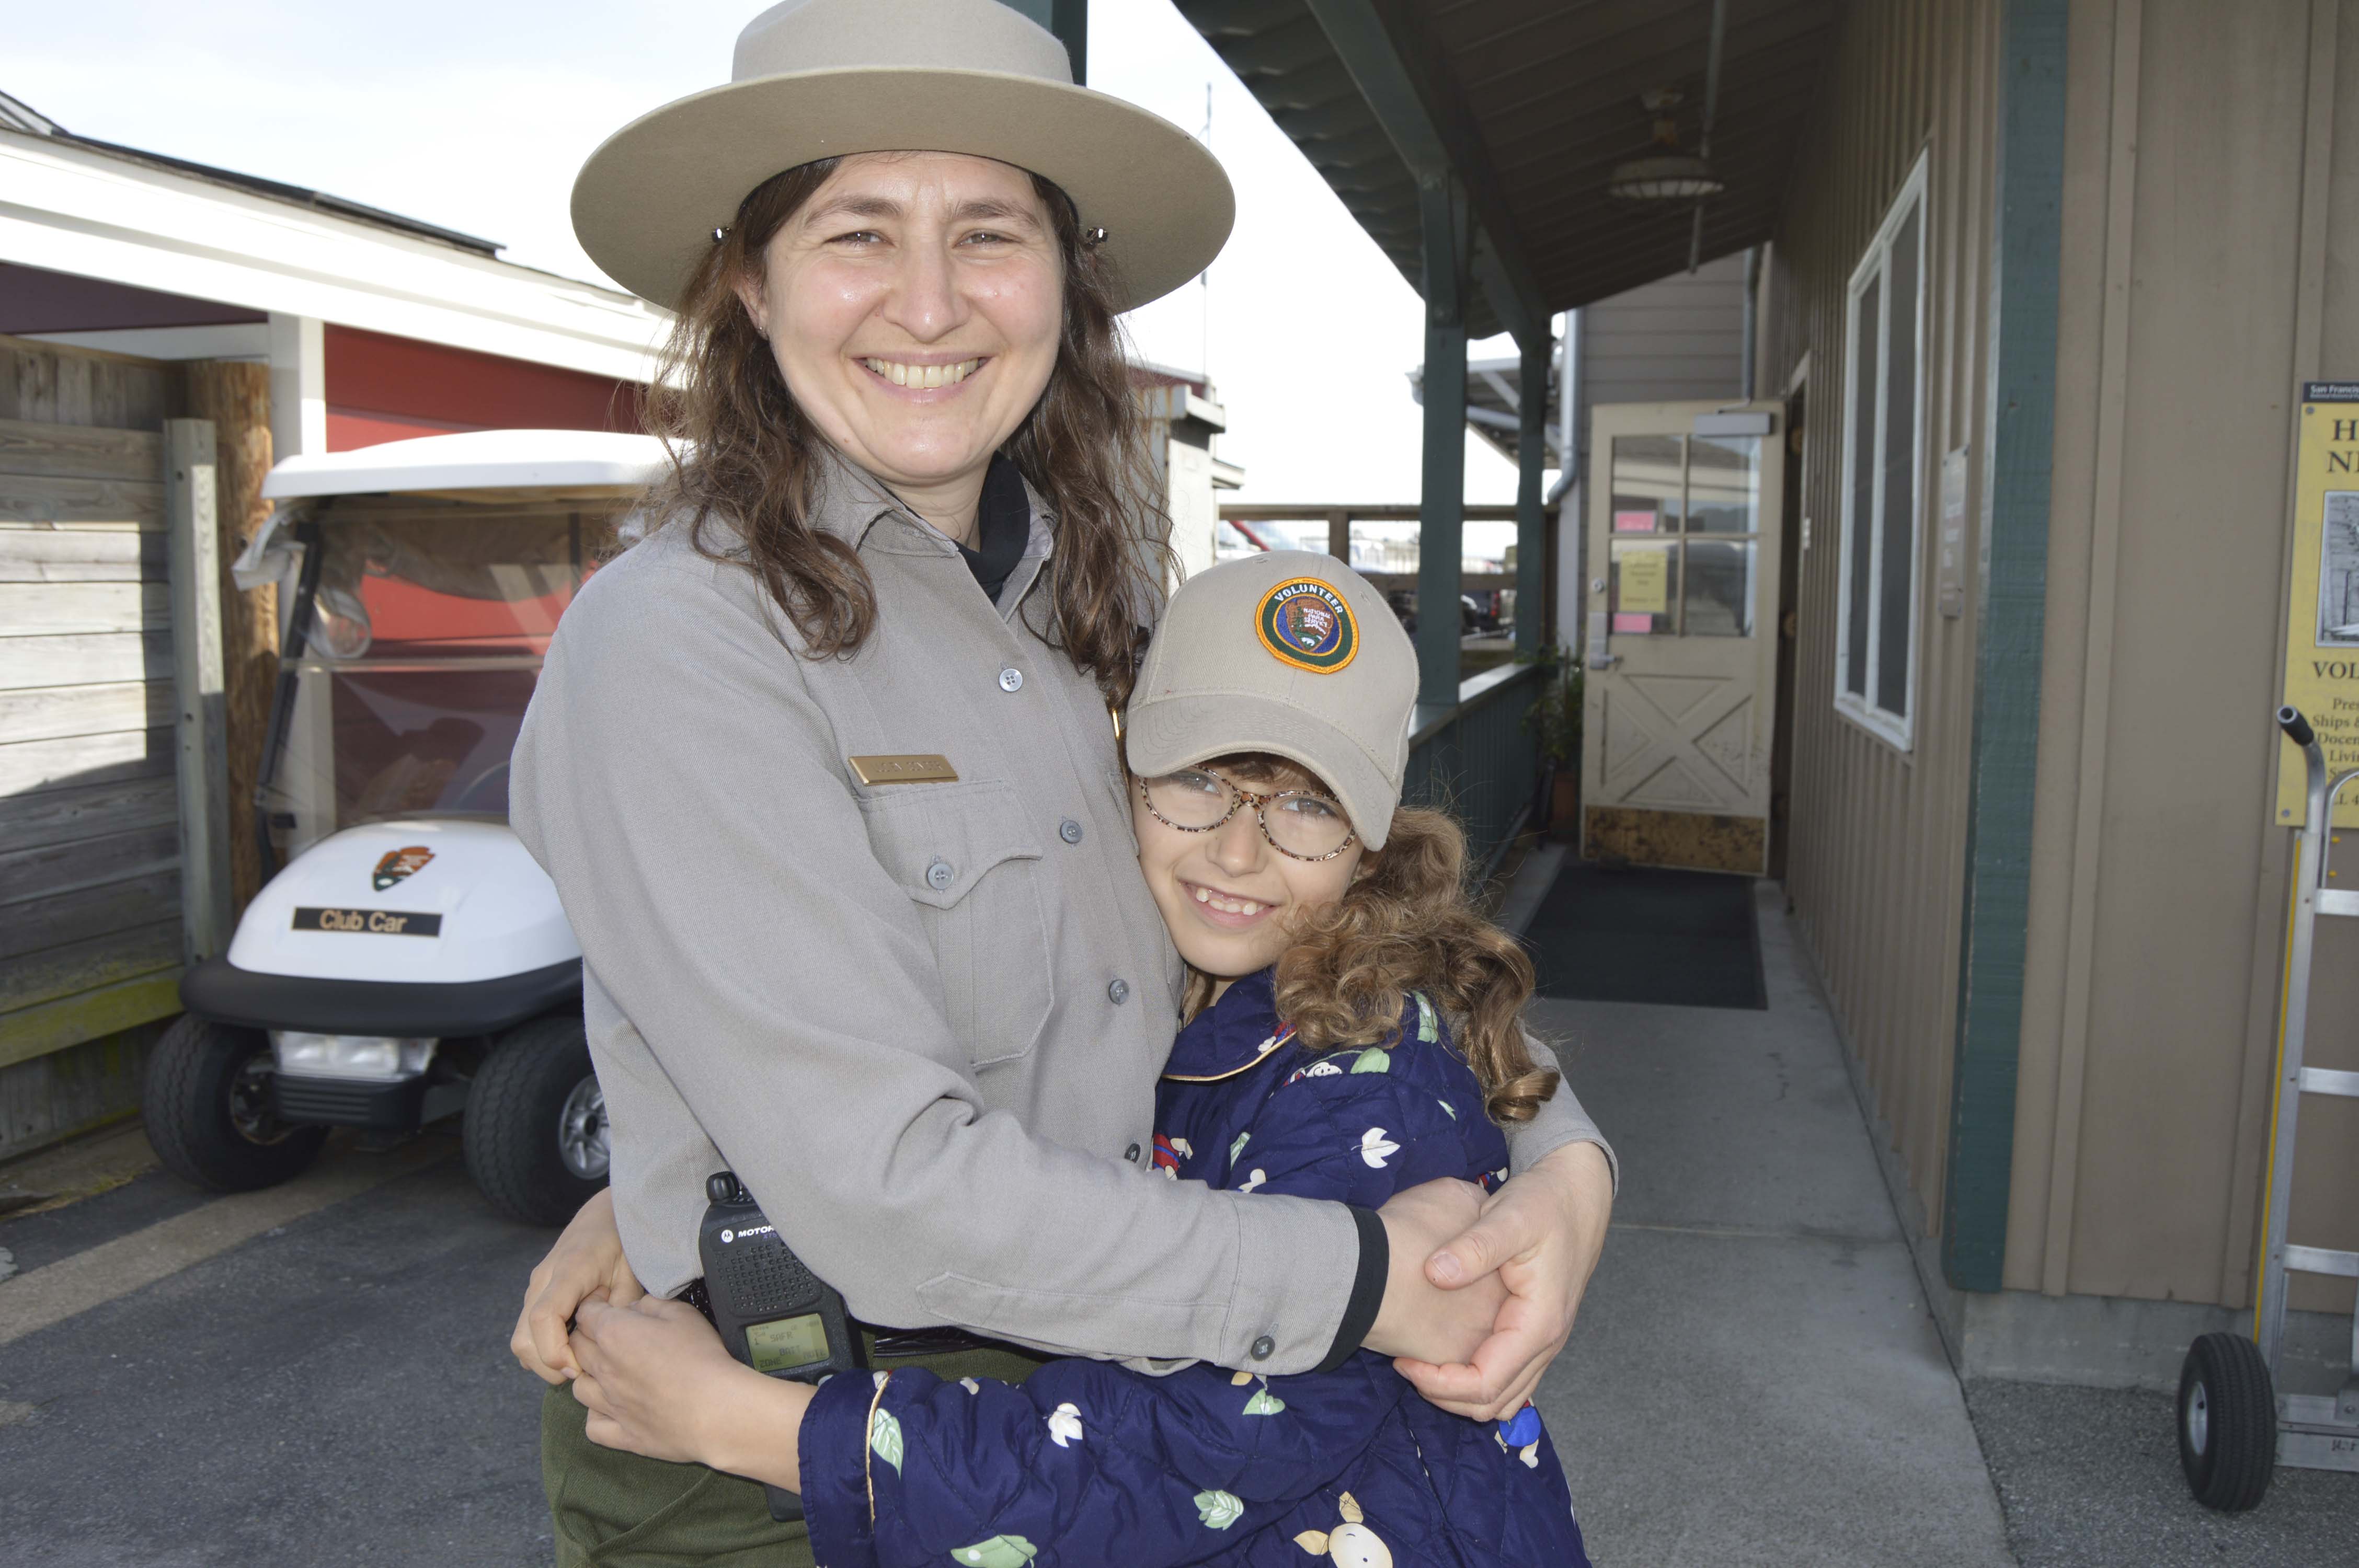 Park Ranger and her daughter